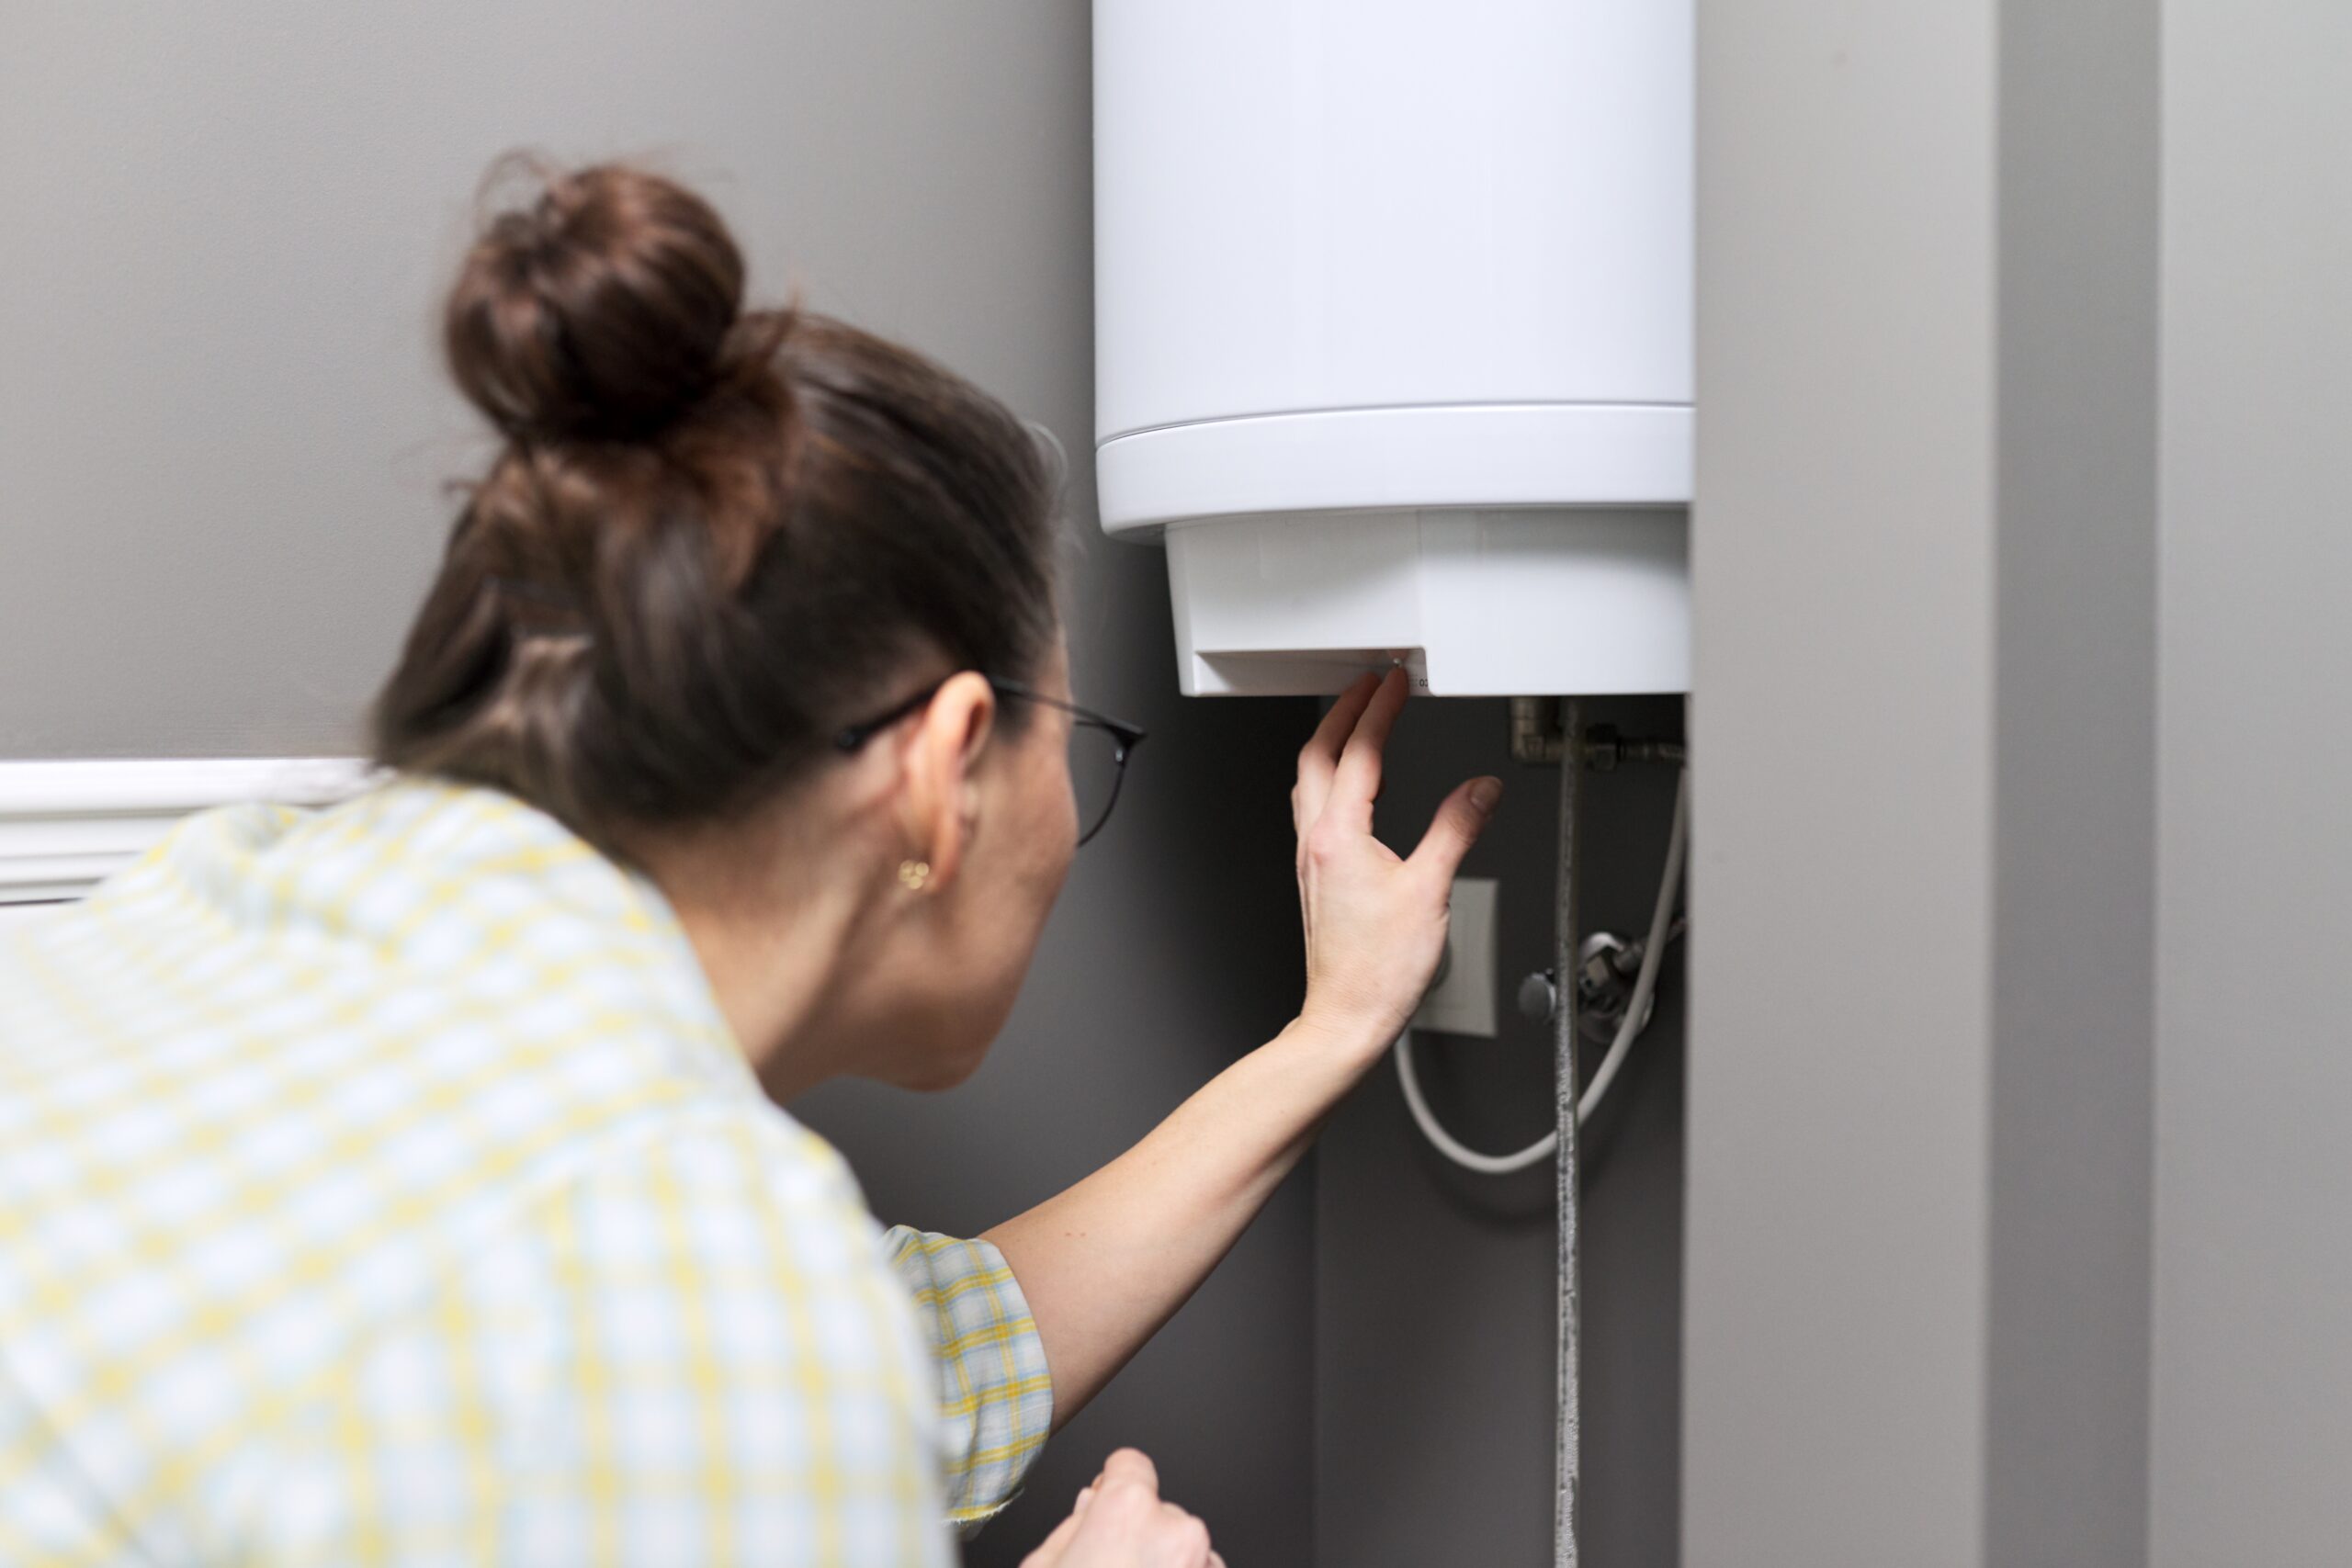 Modern tankless water heater providing efficient hot water in a home.